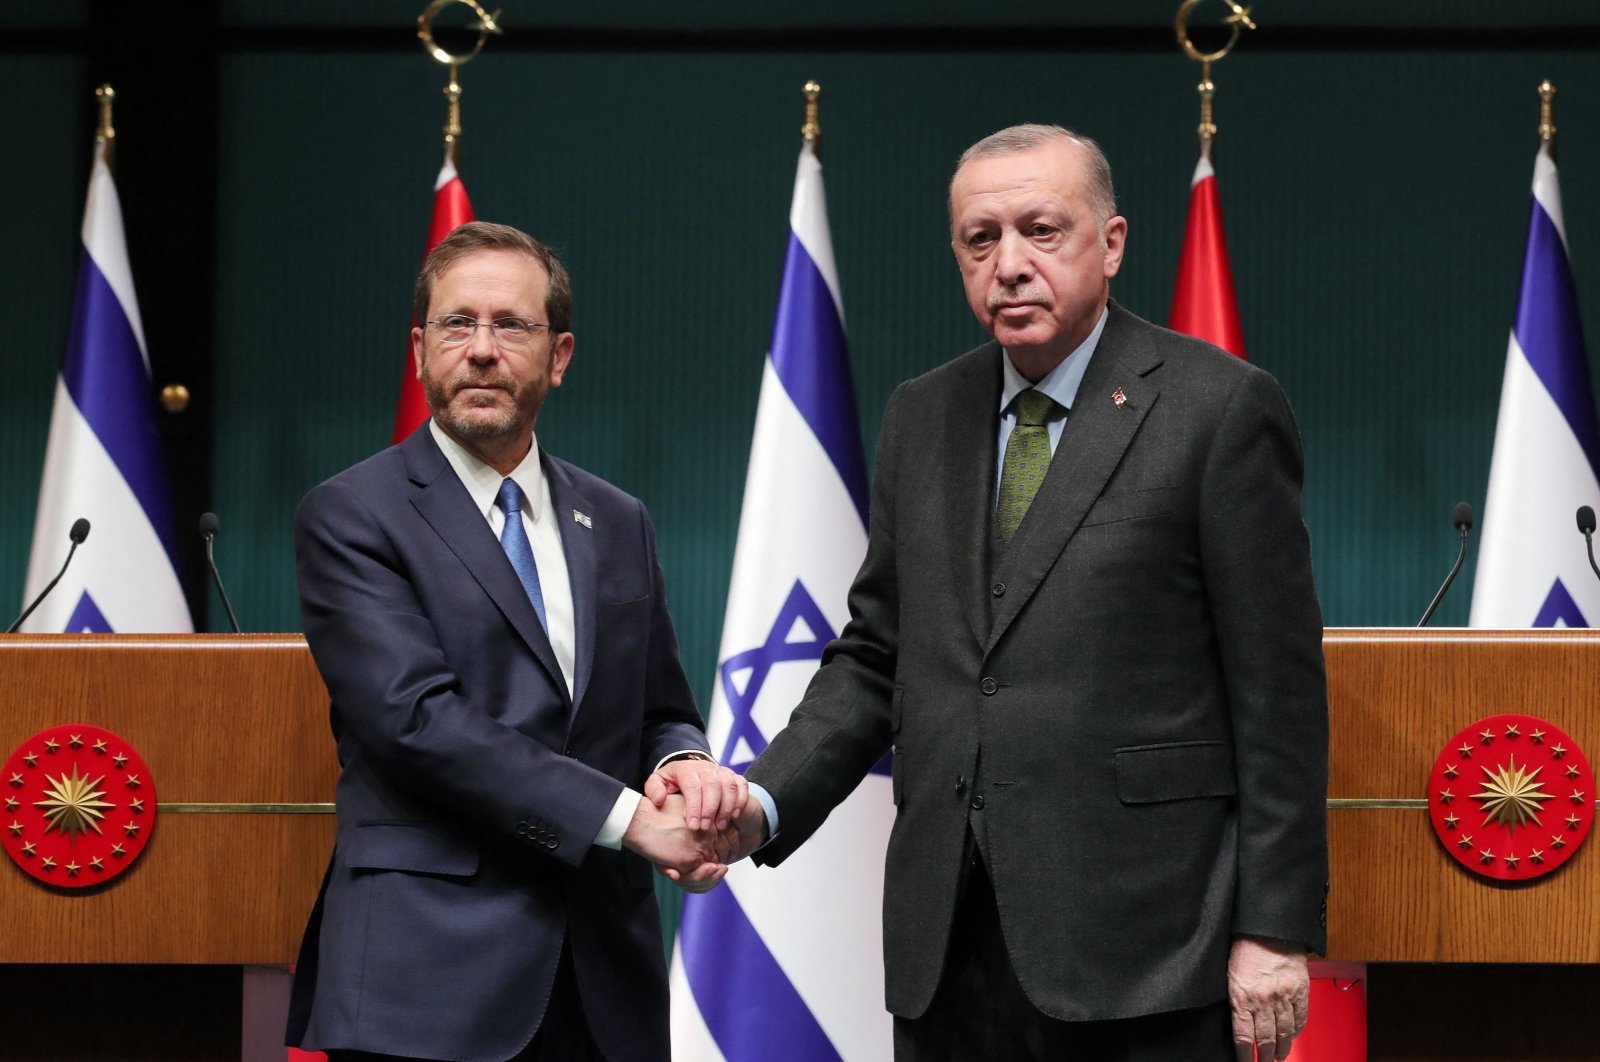 This handout picture released on March 9, 2022 by the Turkish Presidential Press Service shows Israeli President Isaac Herzog (L) and his Turkish counterpart Recep Tayyip Erdoğan shaking hands after a joint press conference in Ankara. (AFP Photo)